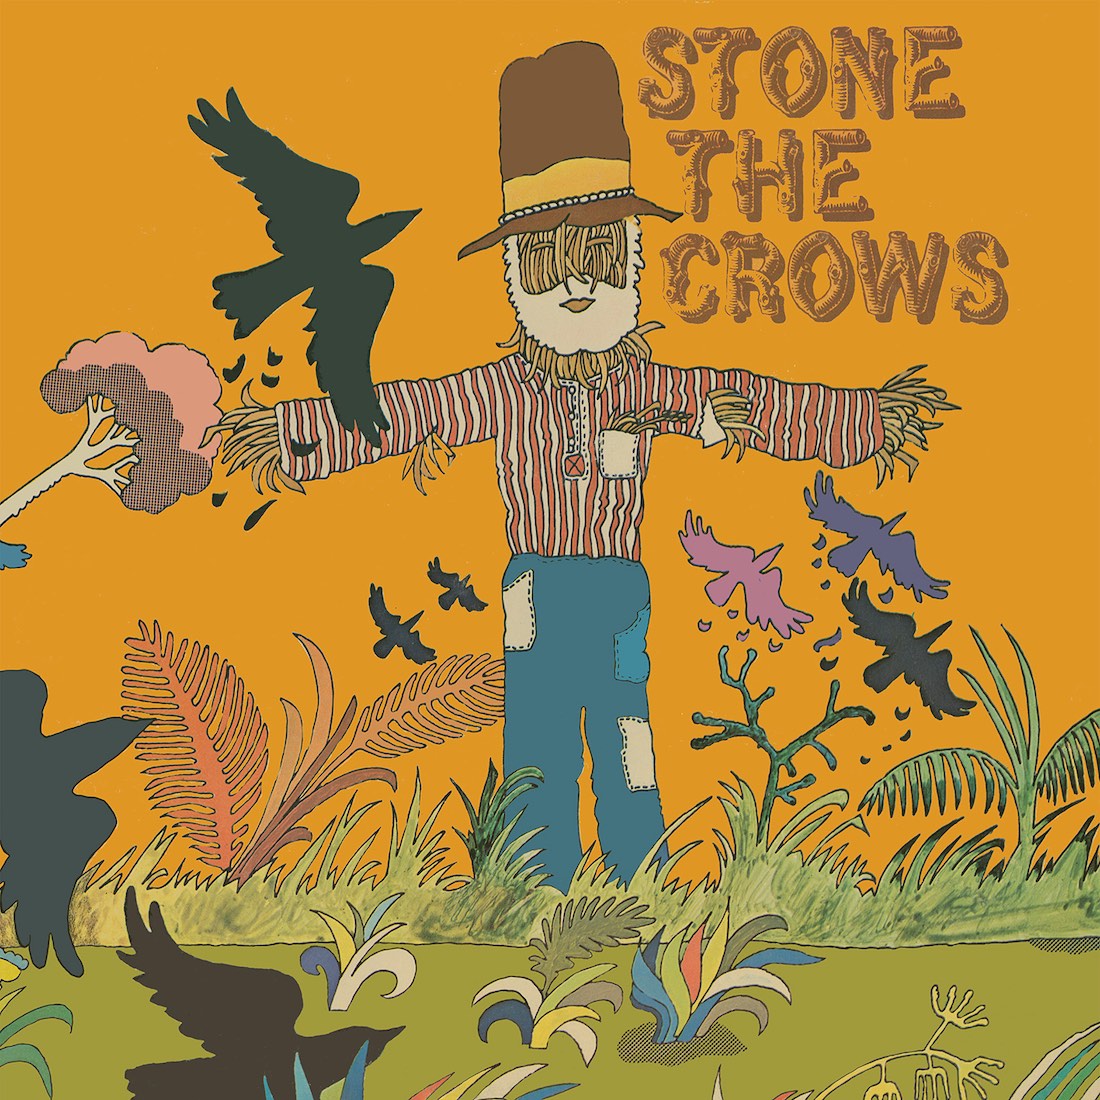 Stone The Crows featured in Classic Rock Magazine Repertoire Records